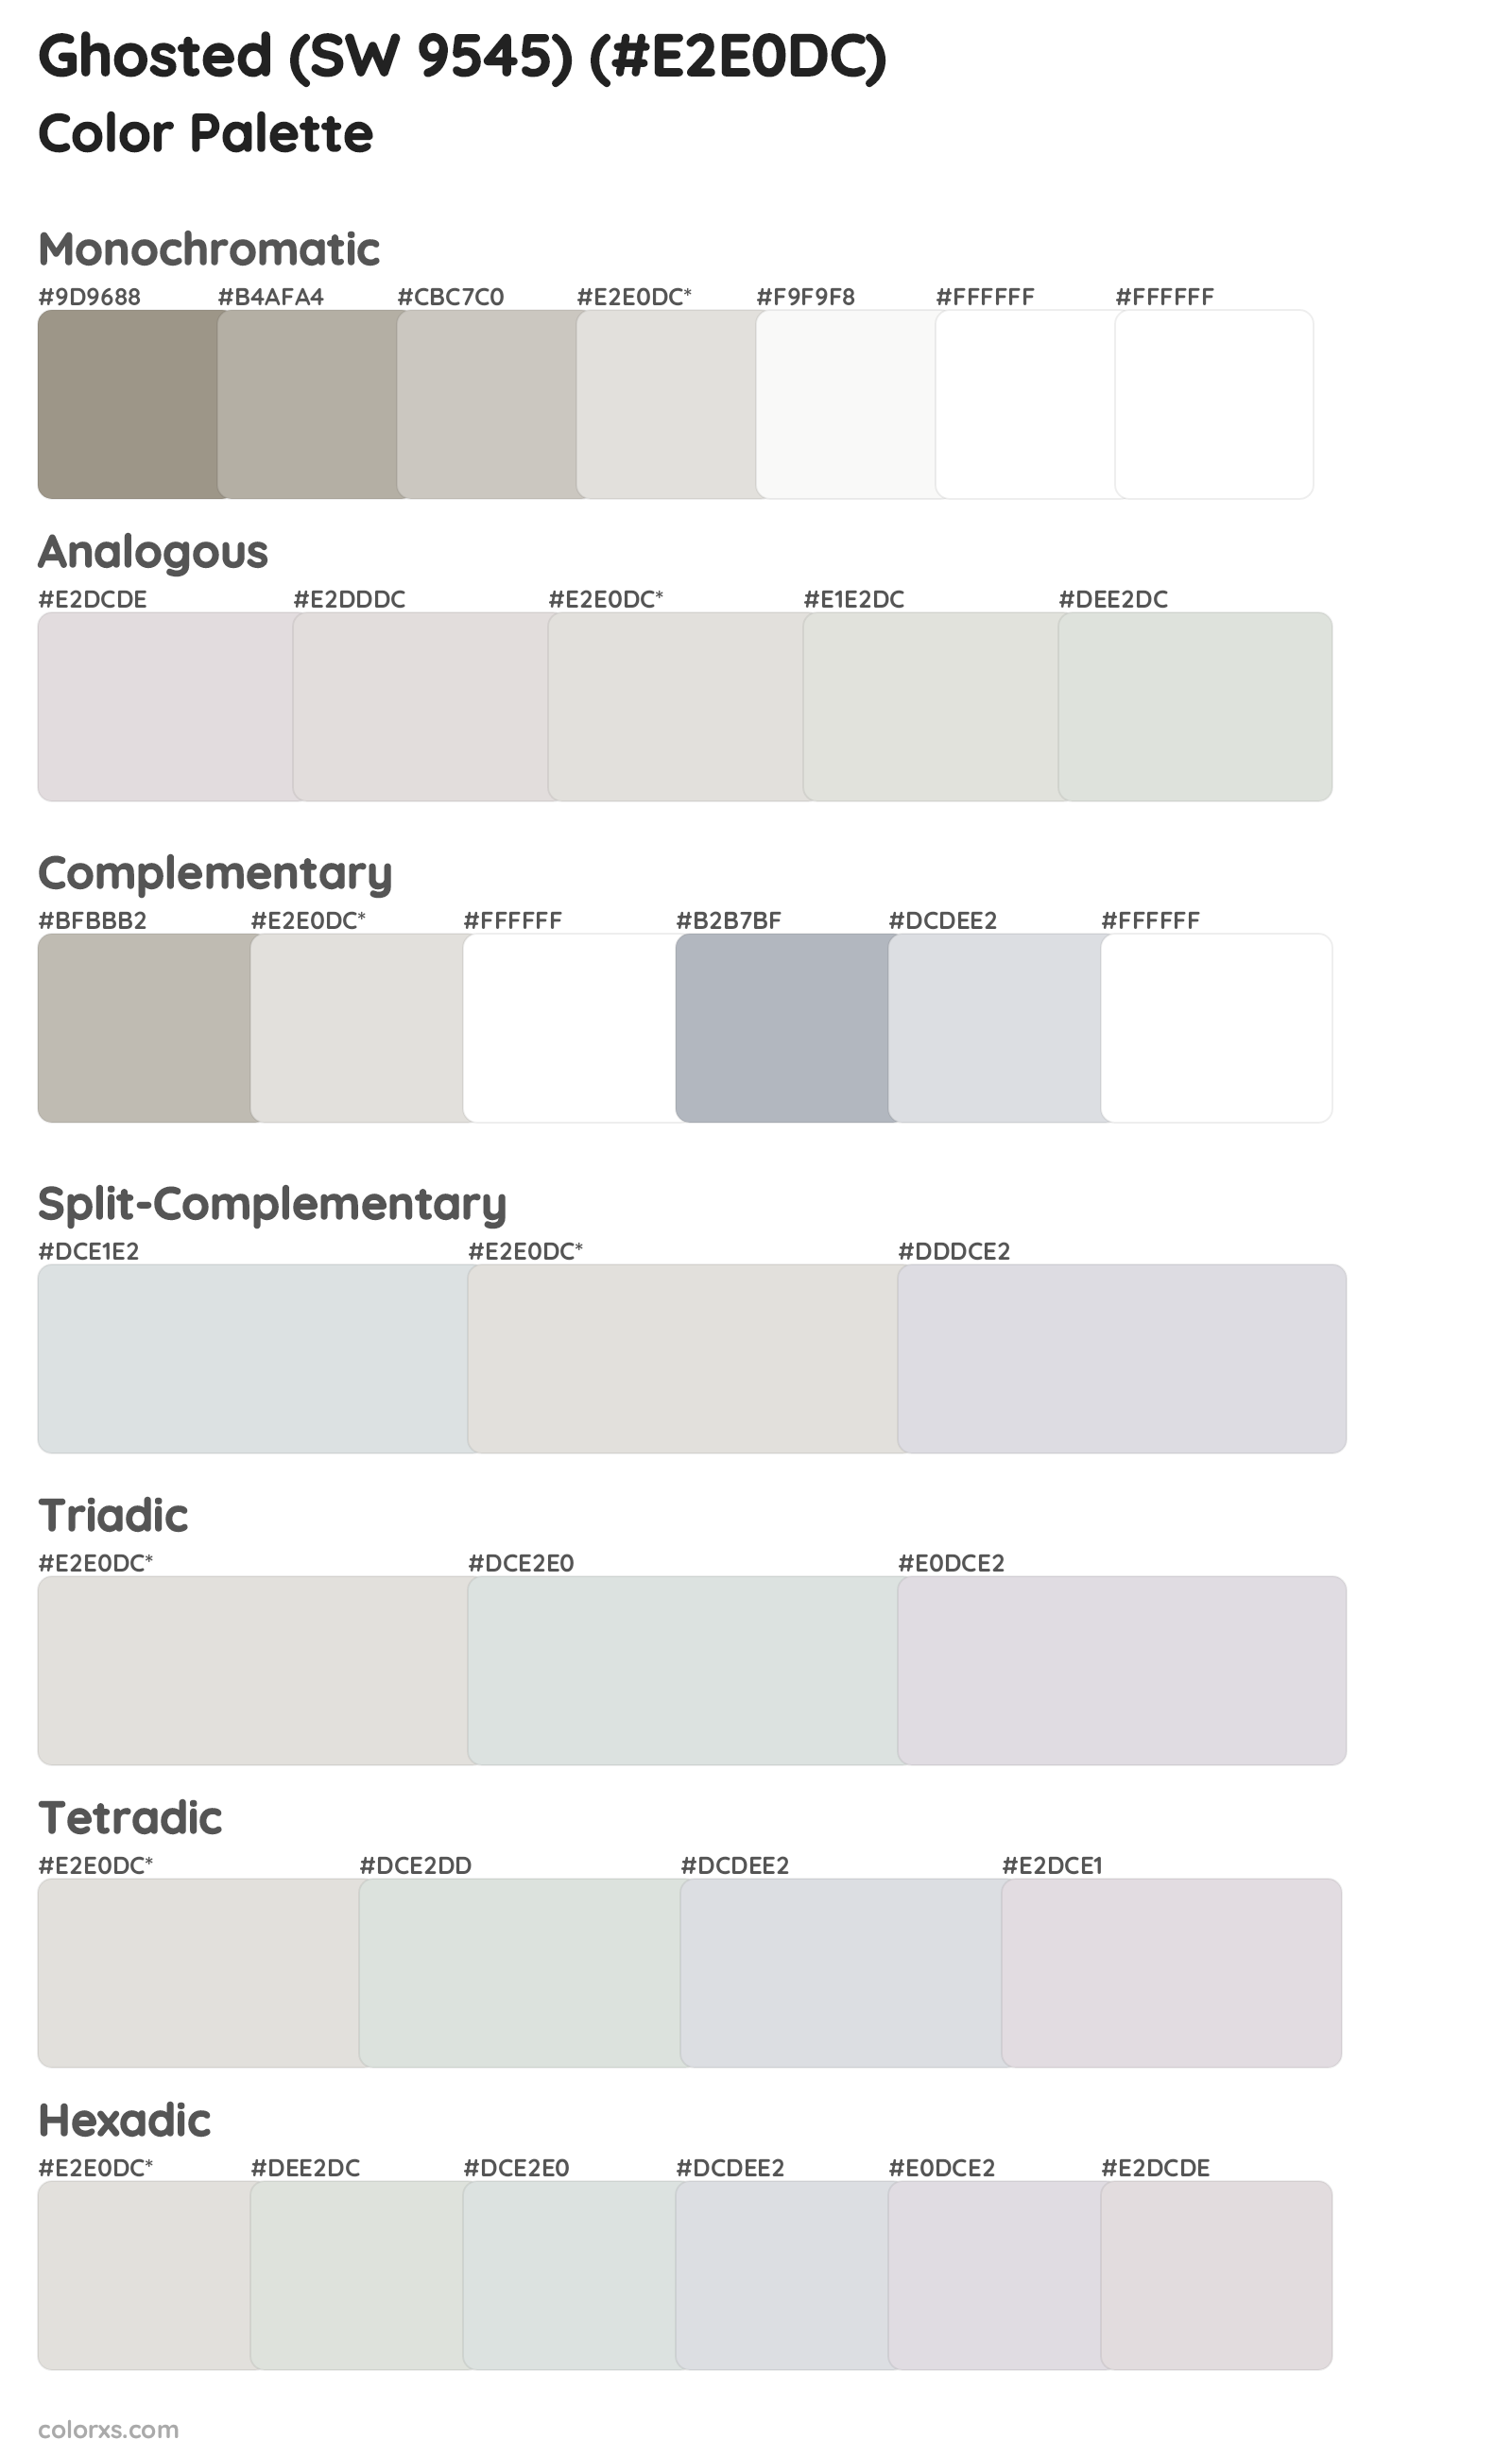 Ghosted (SW 9545) Color Scheme Palettes